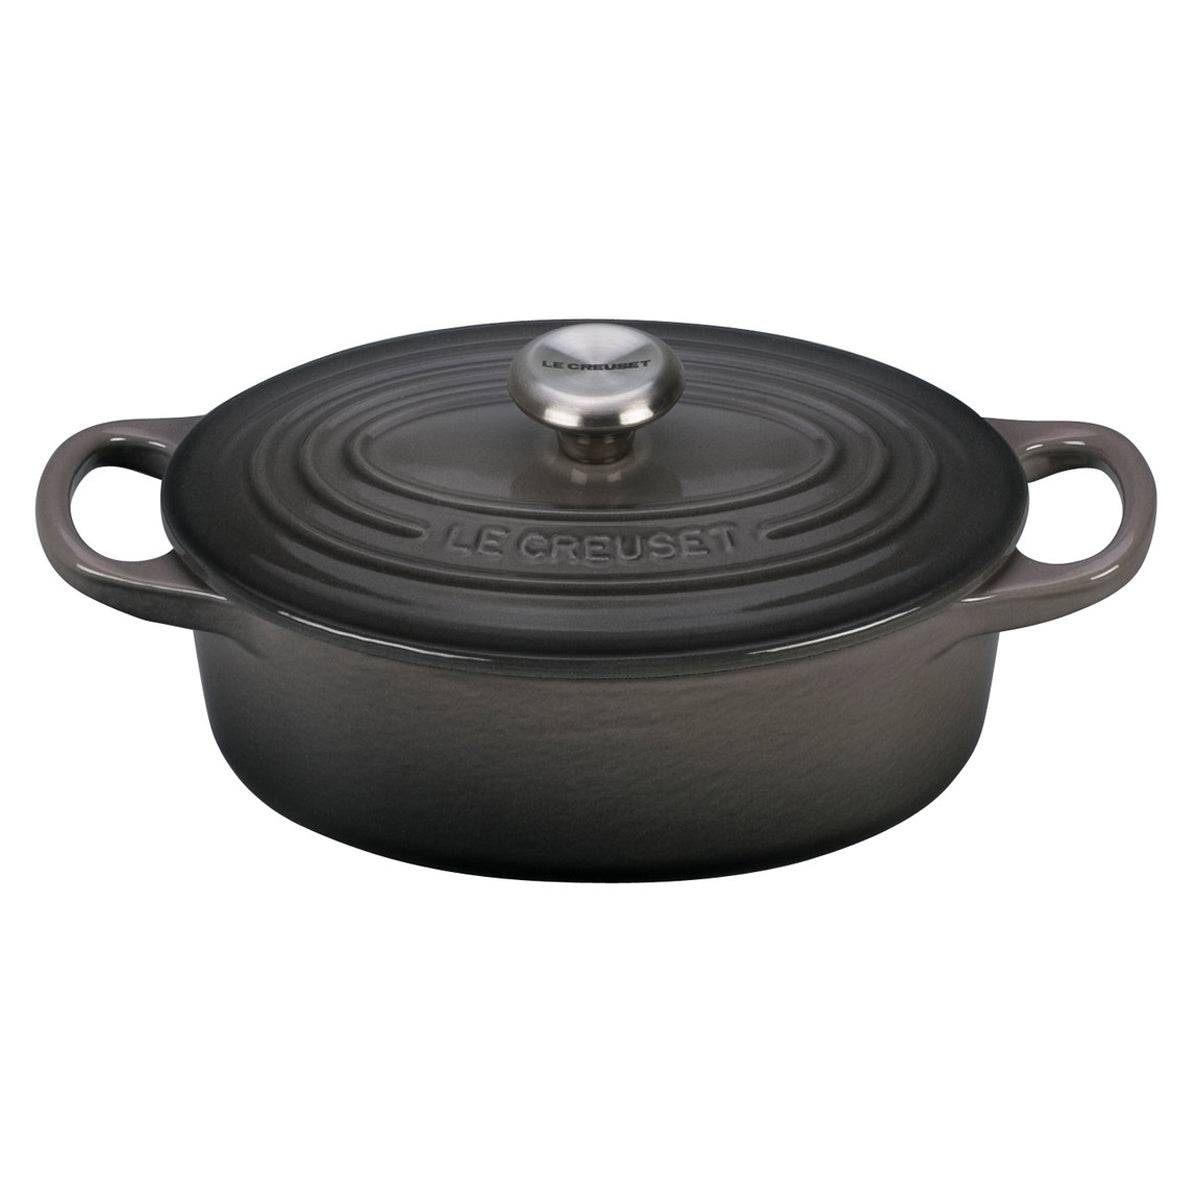 Le Creuset Signature Enameled Cast Iron Oval French / Dutch Oven, 15.5-Quart, Oyster - Kitchen Universe